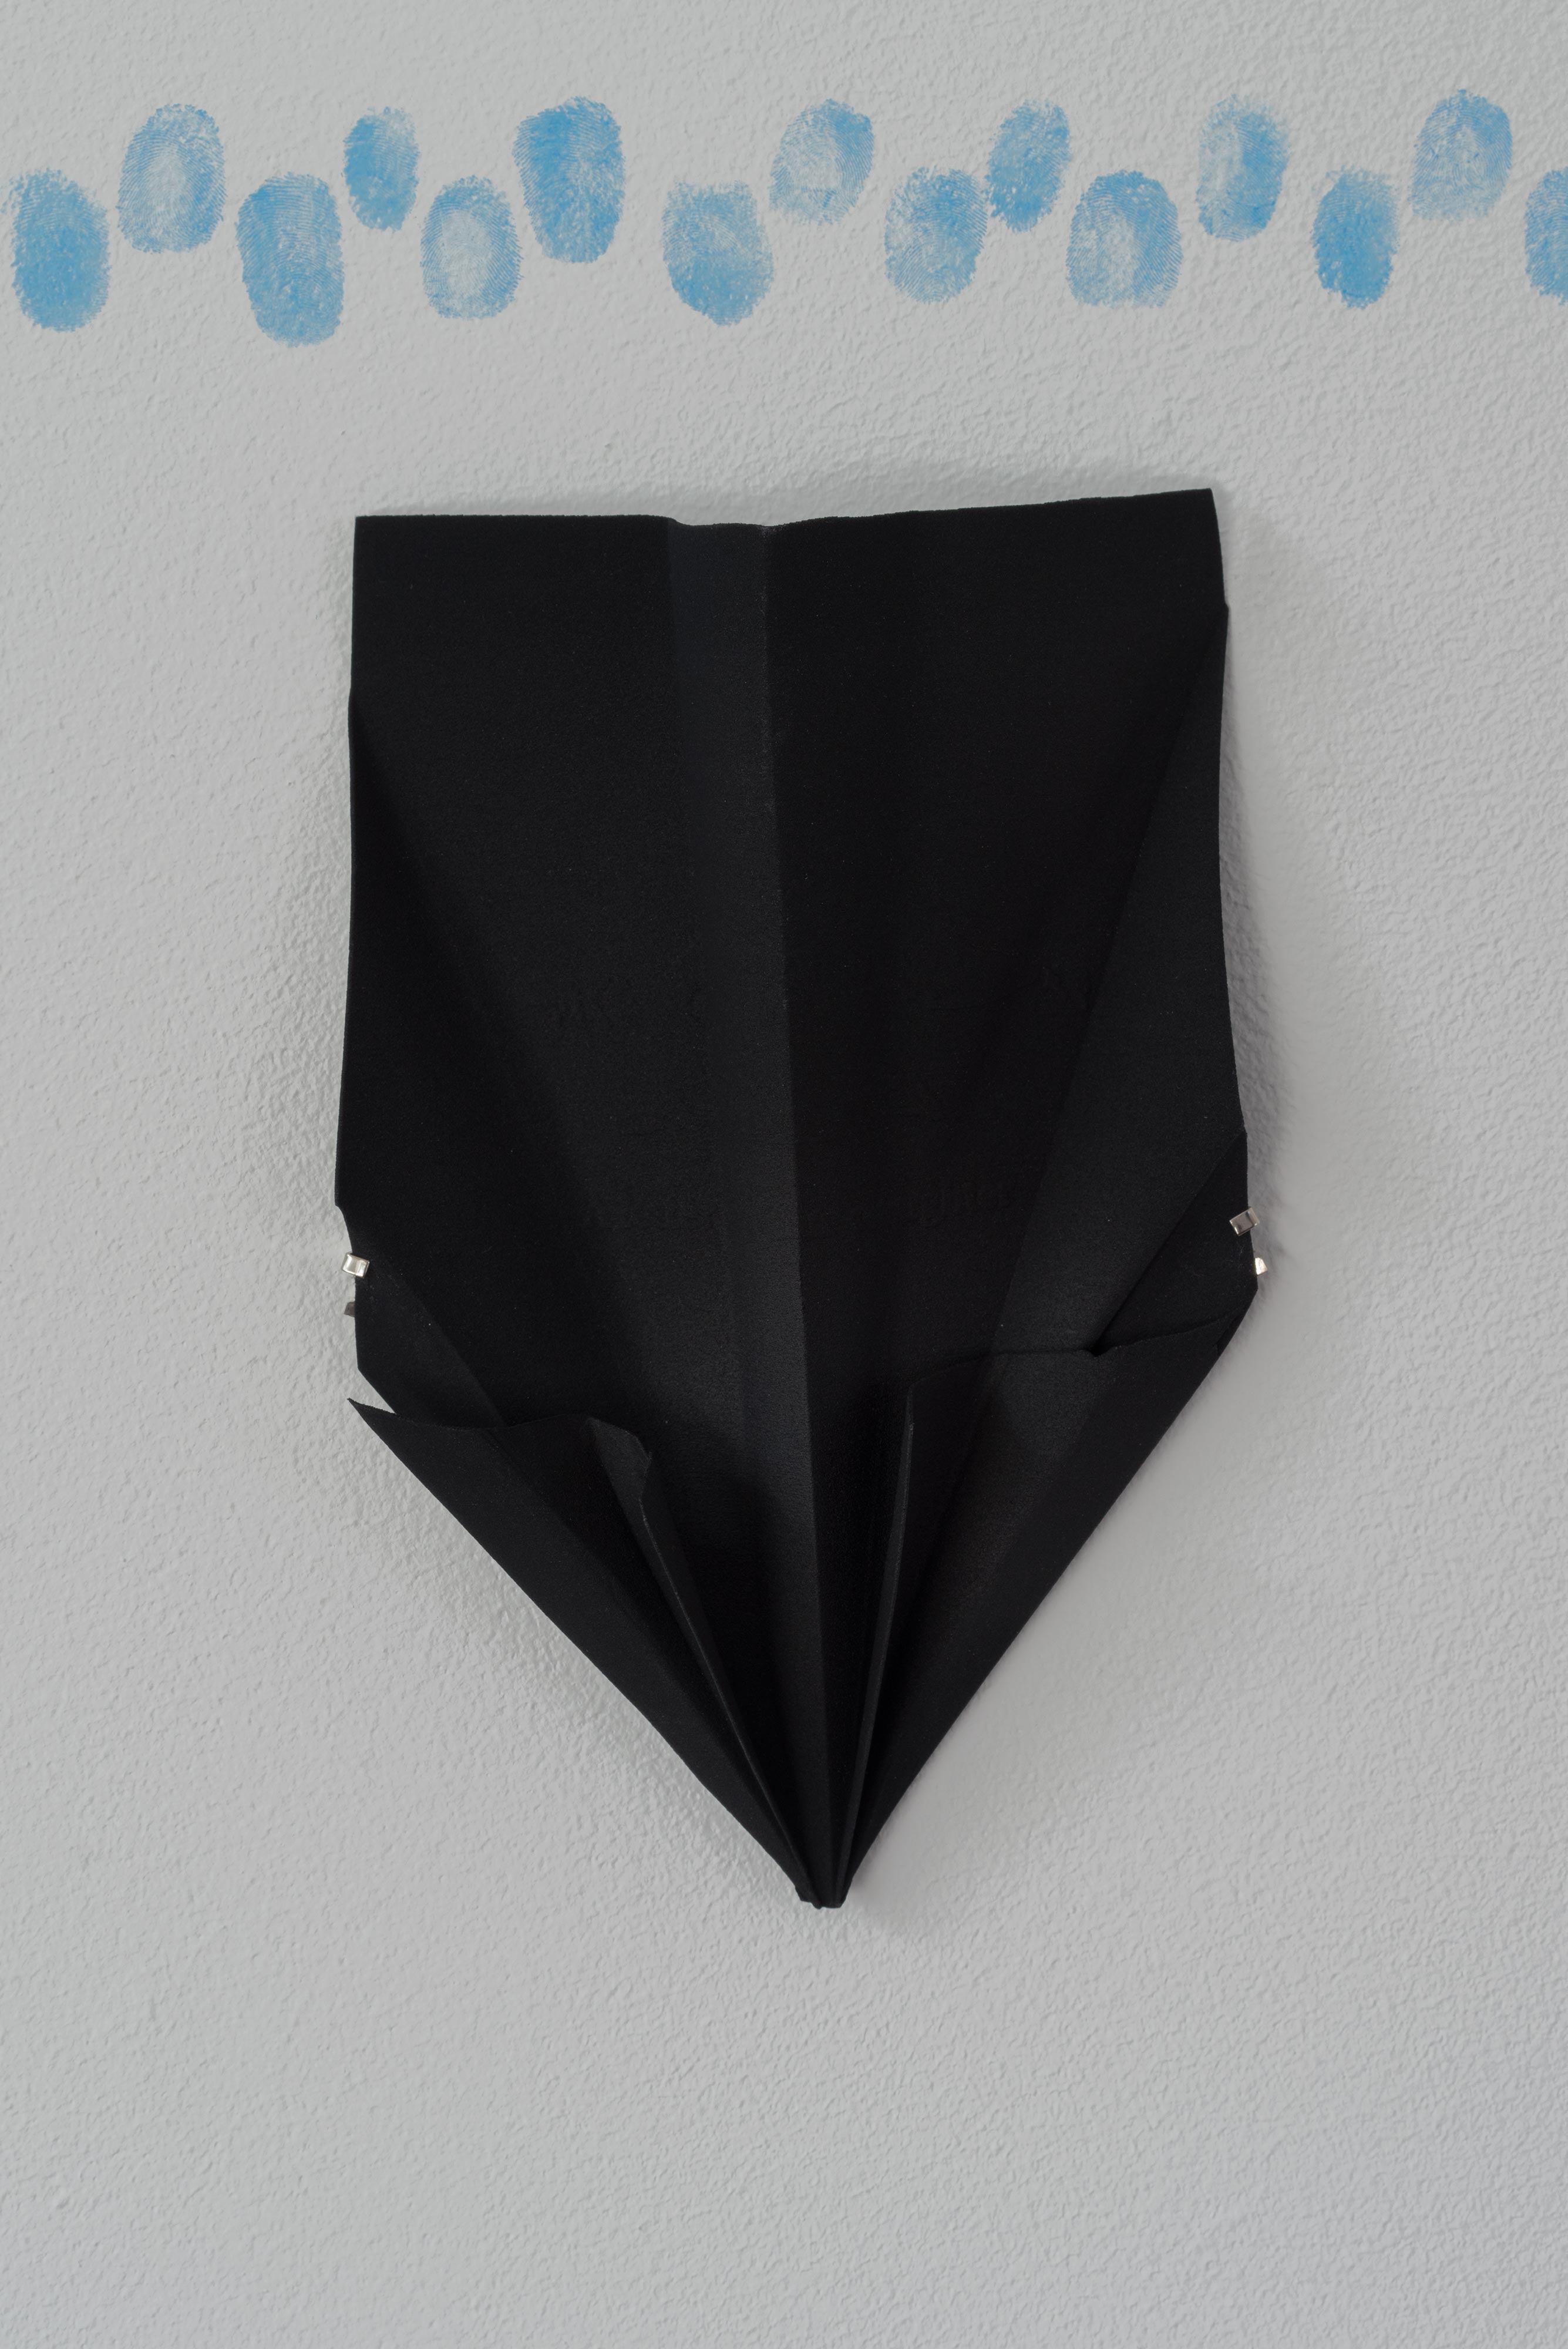 Sconce (This is Water, Black)<br>2016<br>Porous Nylon<br>4.938 x 8.028 in (12.5 x 20.4 cm)